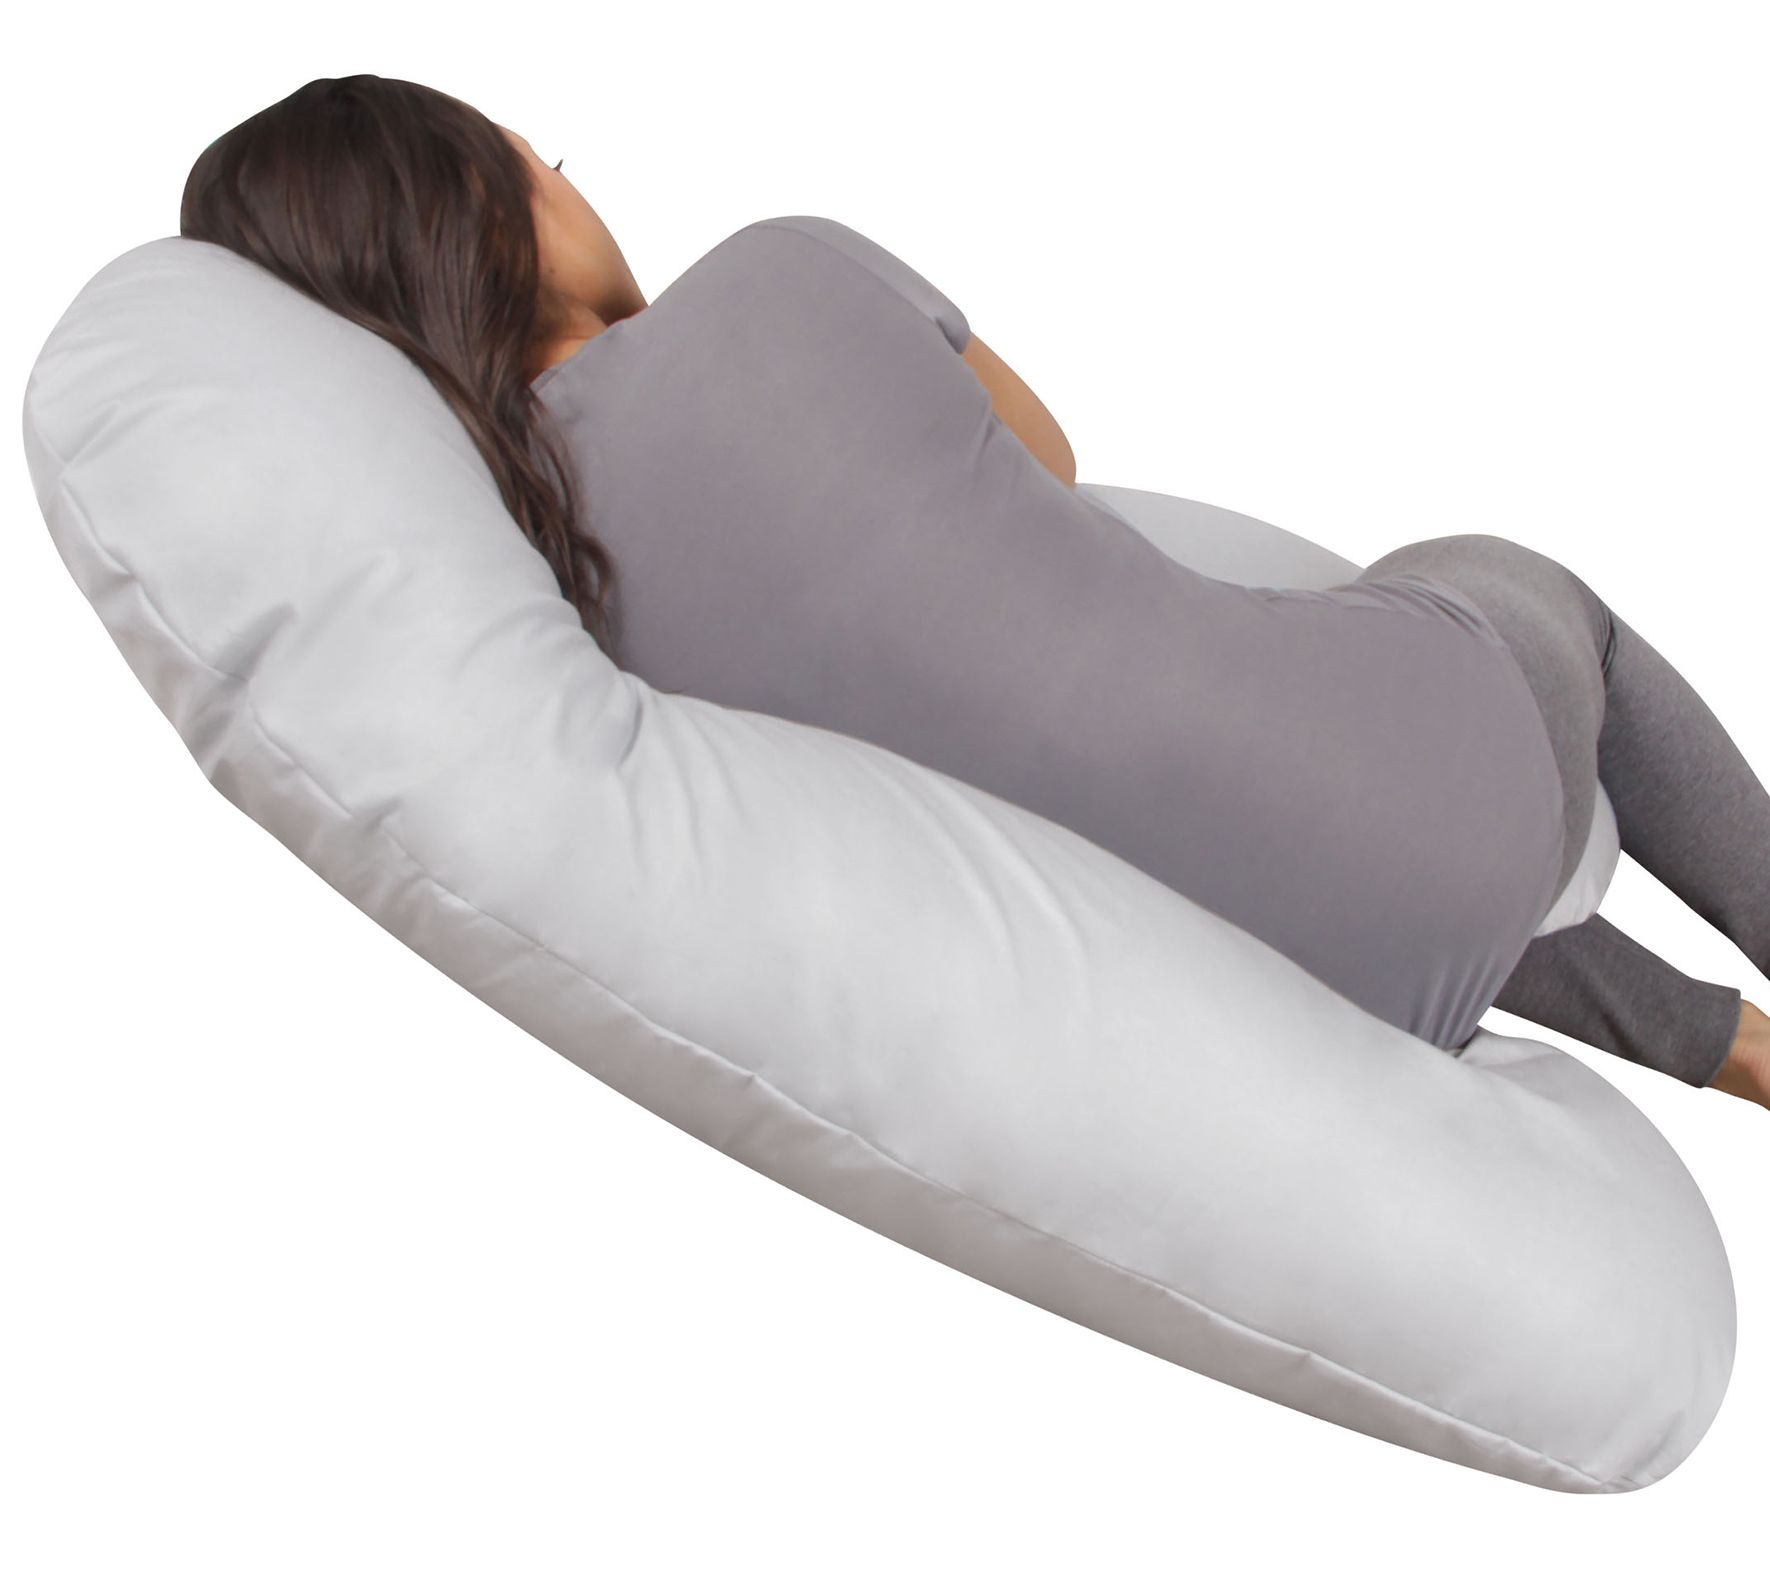 Back 'N Belly® in 2023  Bean bag chair, Support pillows, Body pillow